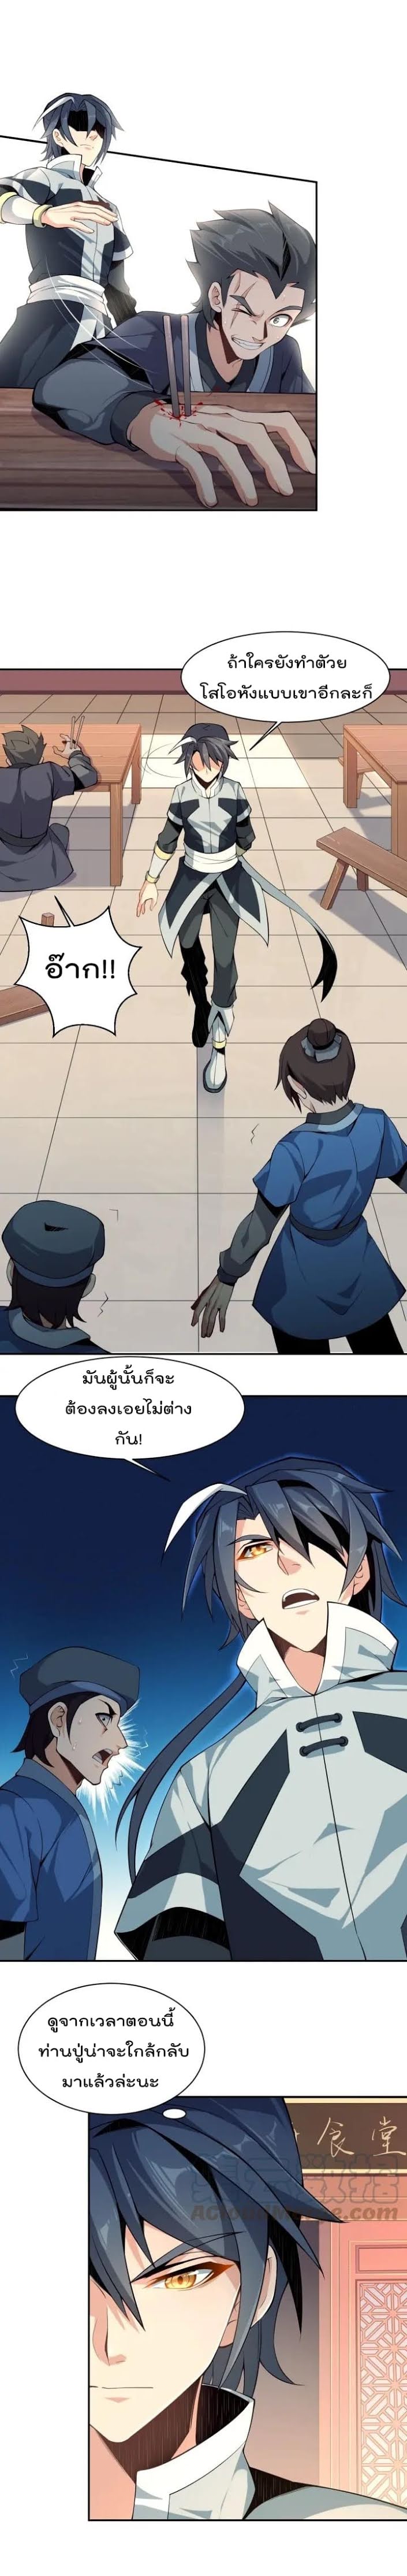 Swallow the Whole World ตอนที่4 (2)